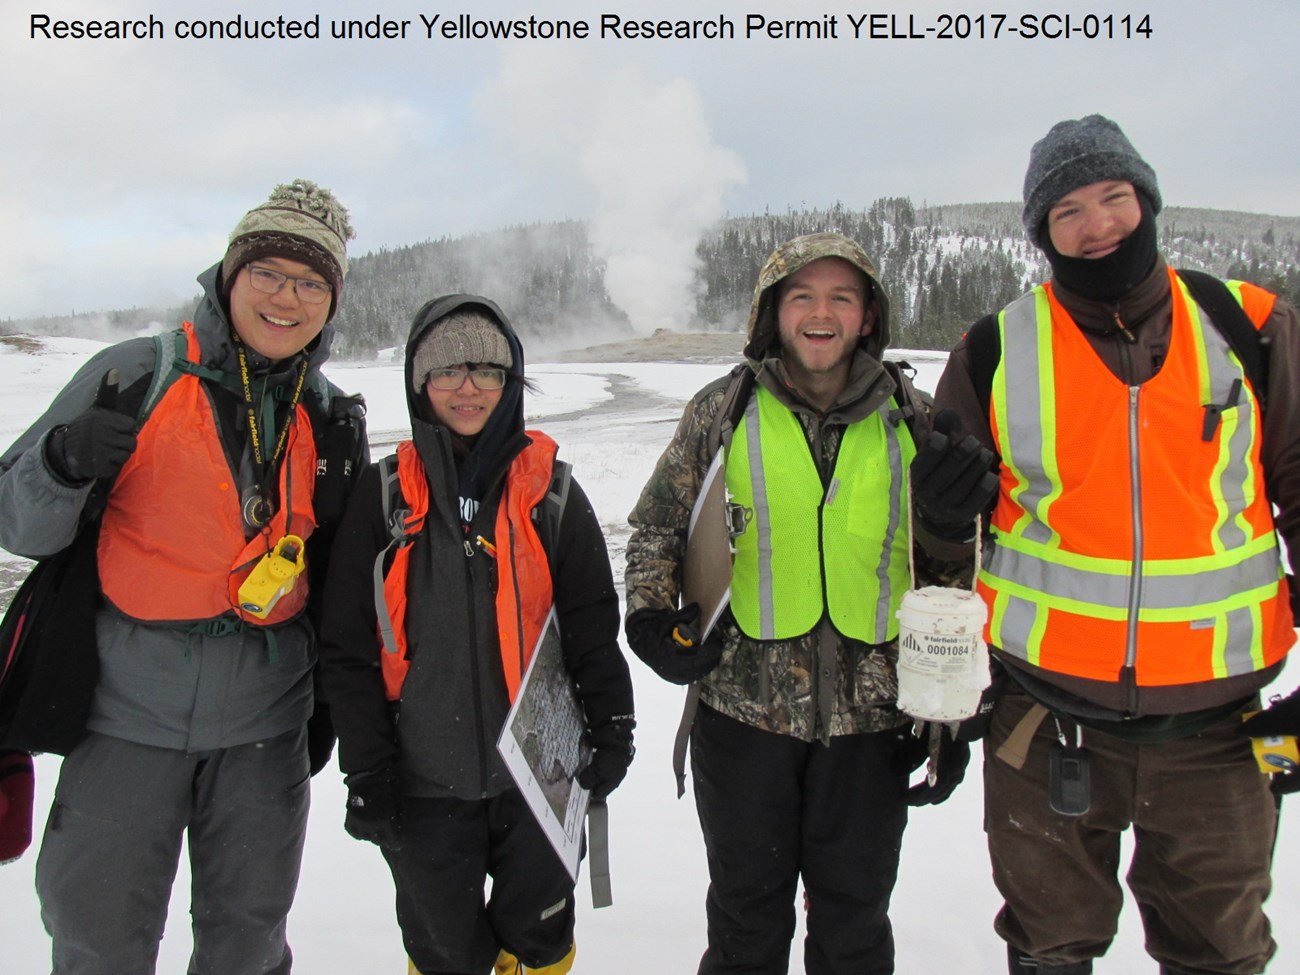 Geologists from University of Utah conduct research on Old Faithful geyser. (Left to Right:  Max Jin Hansheng, Sin-Mei Wu, Jonathan Voyles, Jamie Farrell)